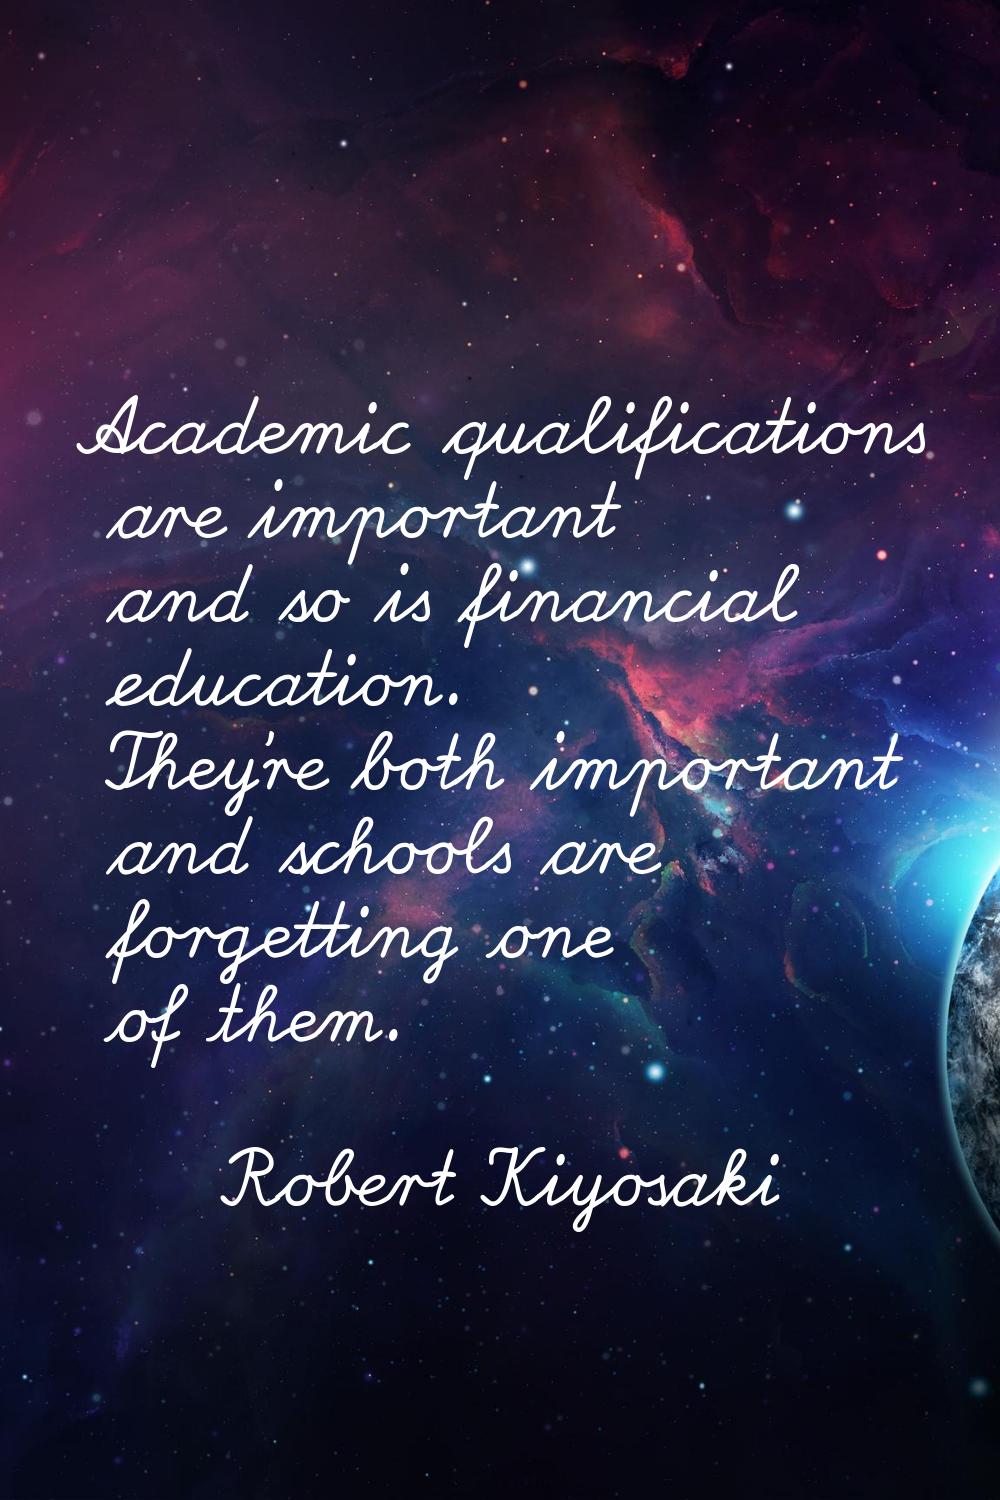 Academic qualifications are important and so is financial education. They're both important and sch